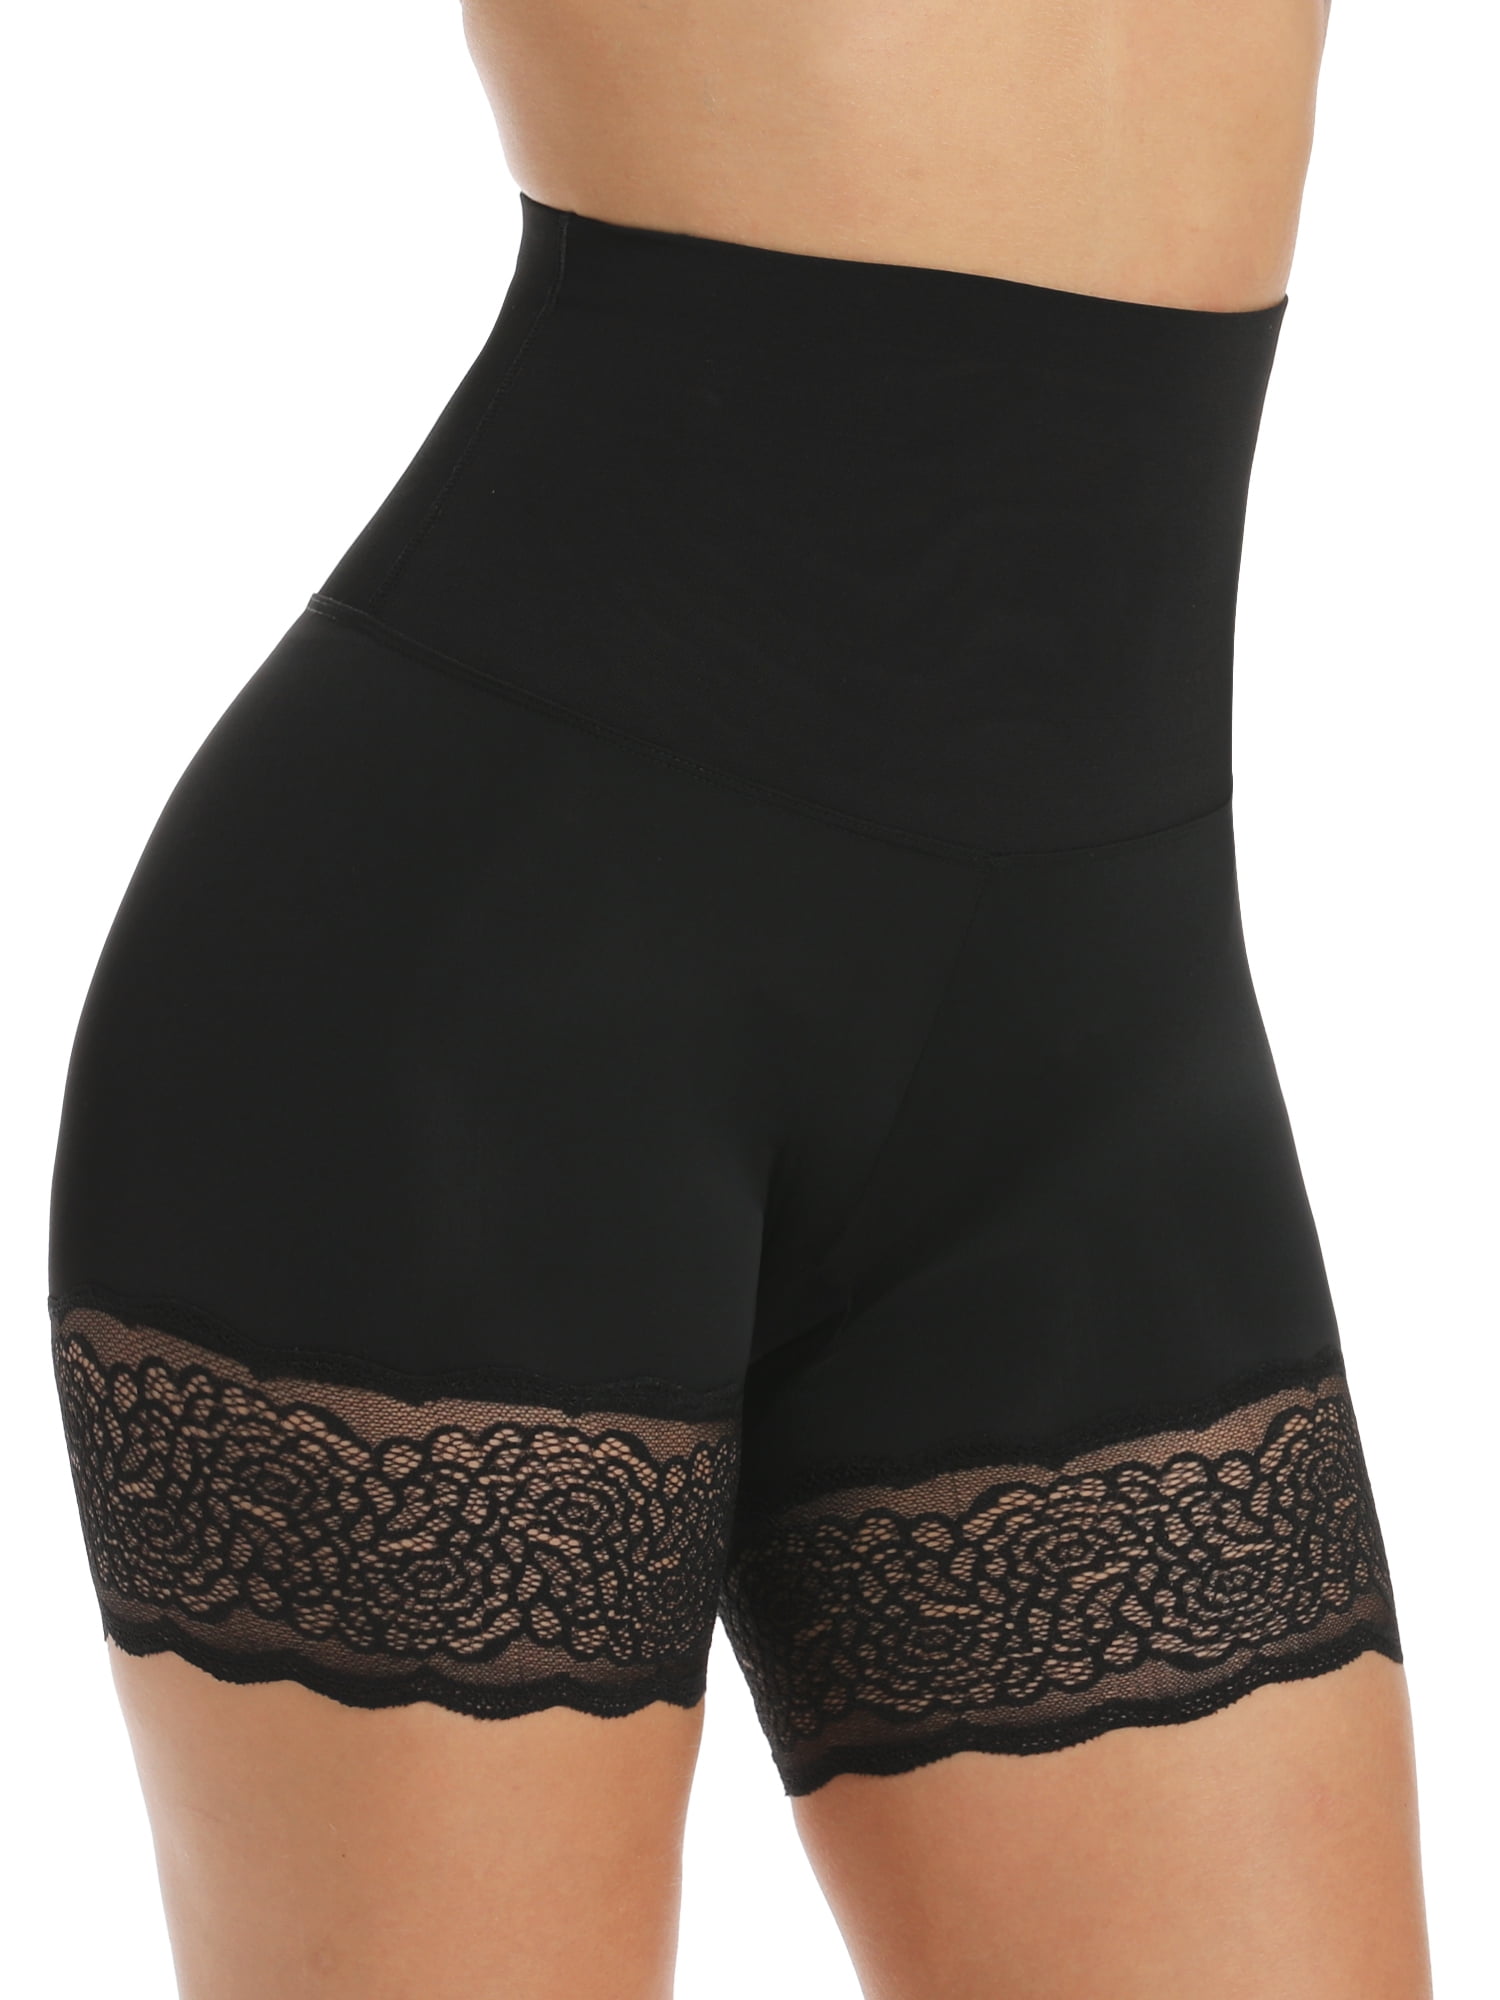 Womens Slip Shorts for Under Dresses Anti Chafing Underwear Mid Thigh Lace Boyshorts Panties